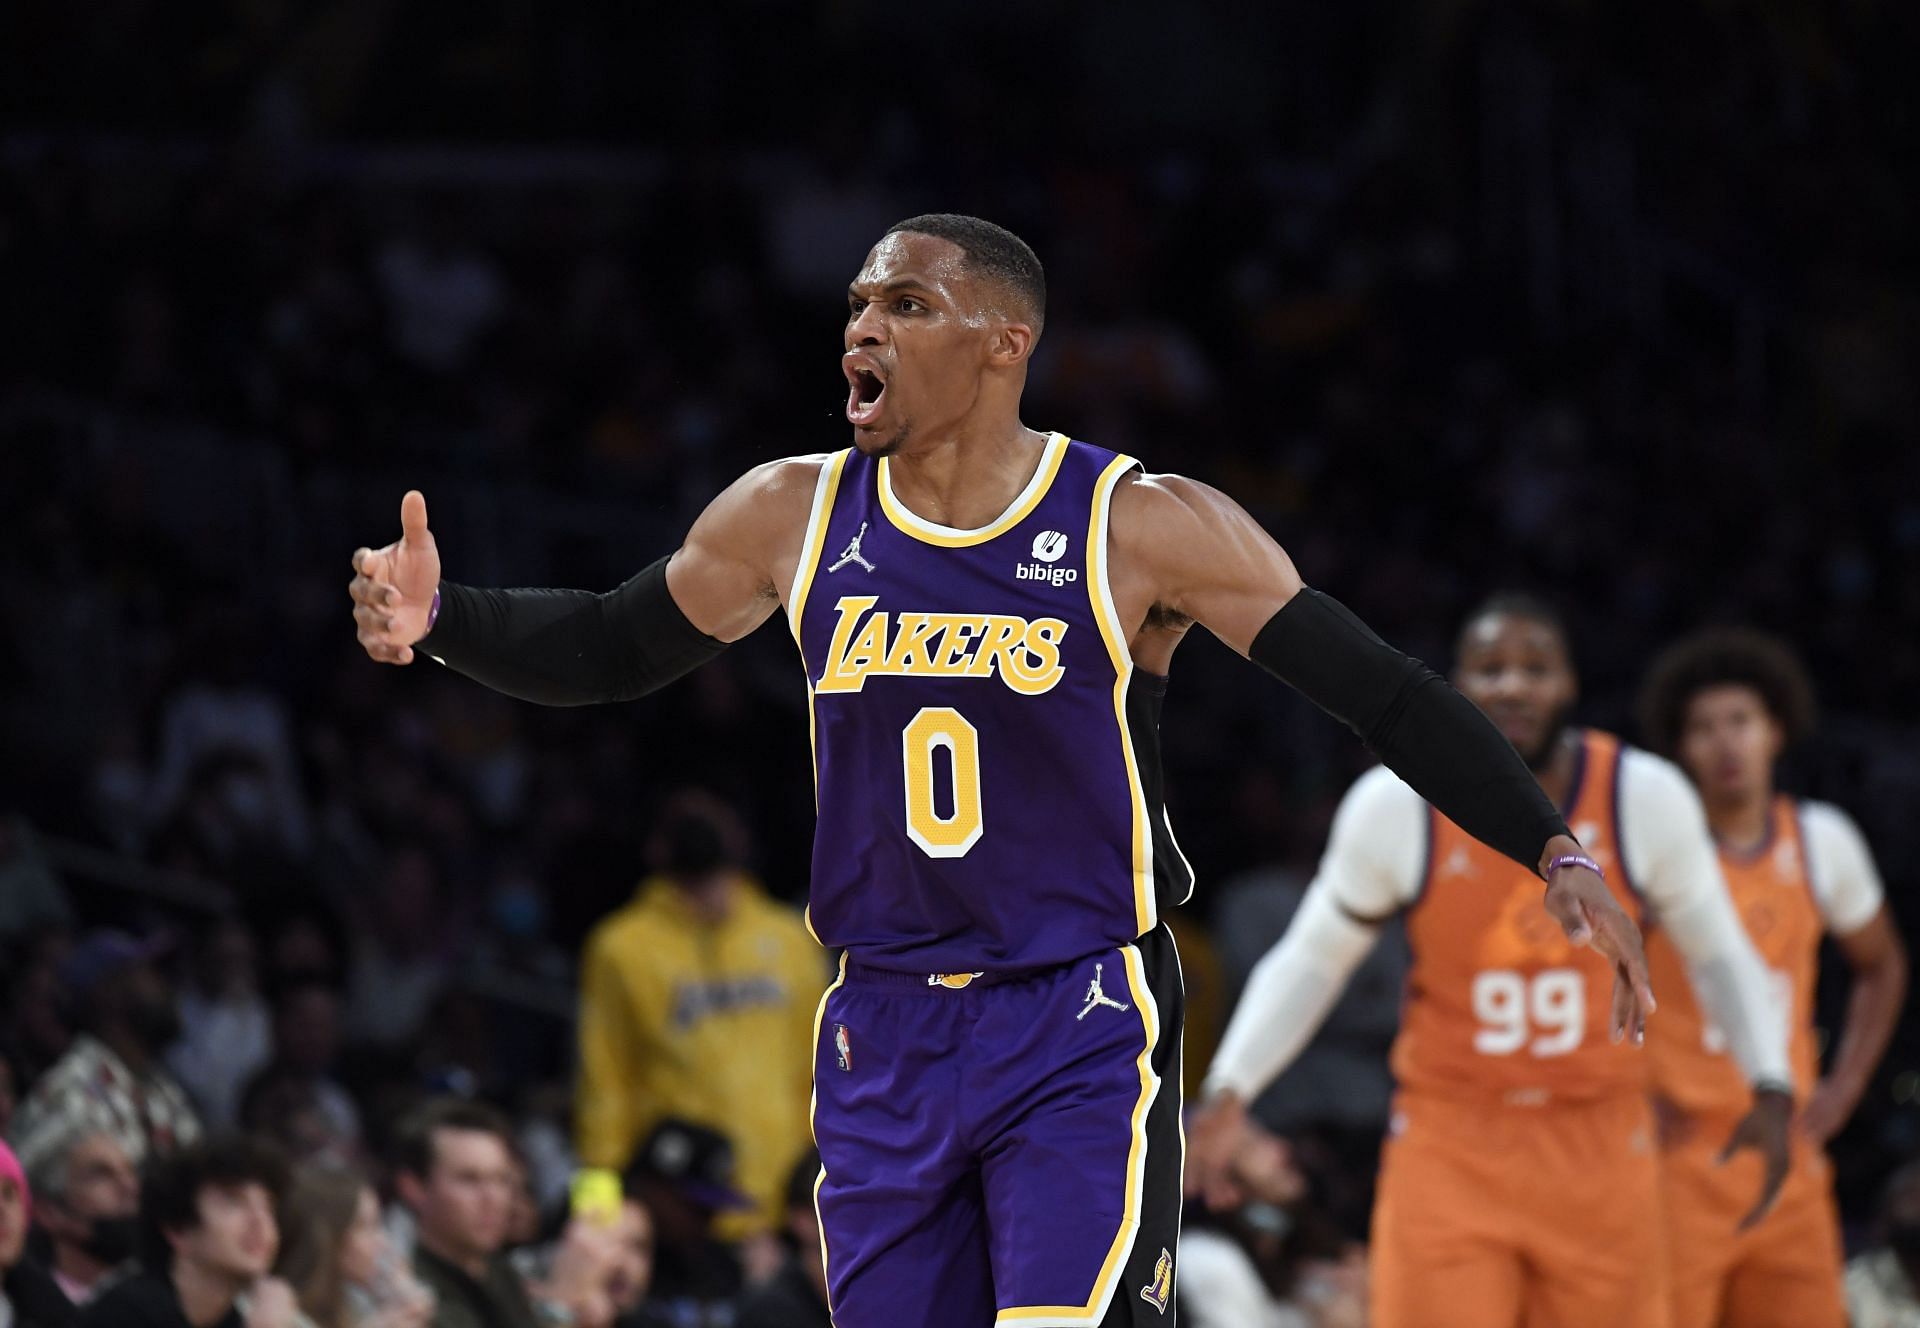 Russell Westbrook in the Phoenix Suns vs LA Lakers game